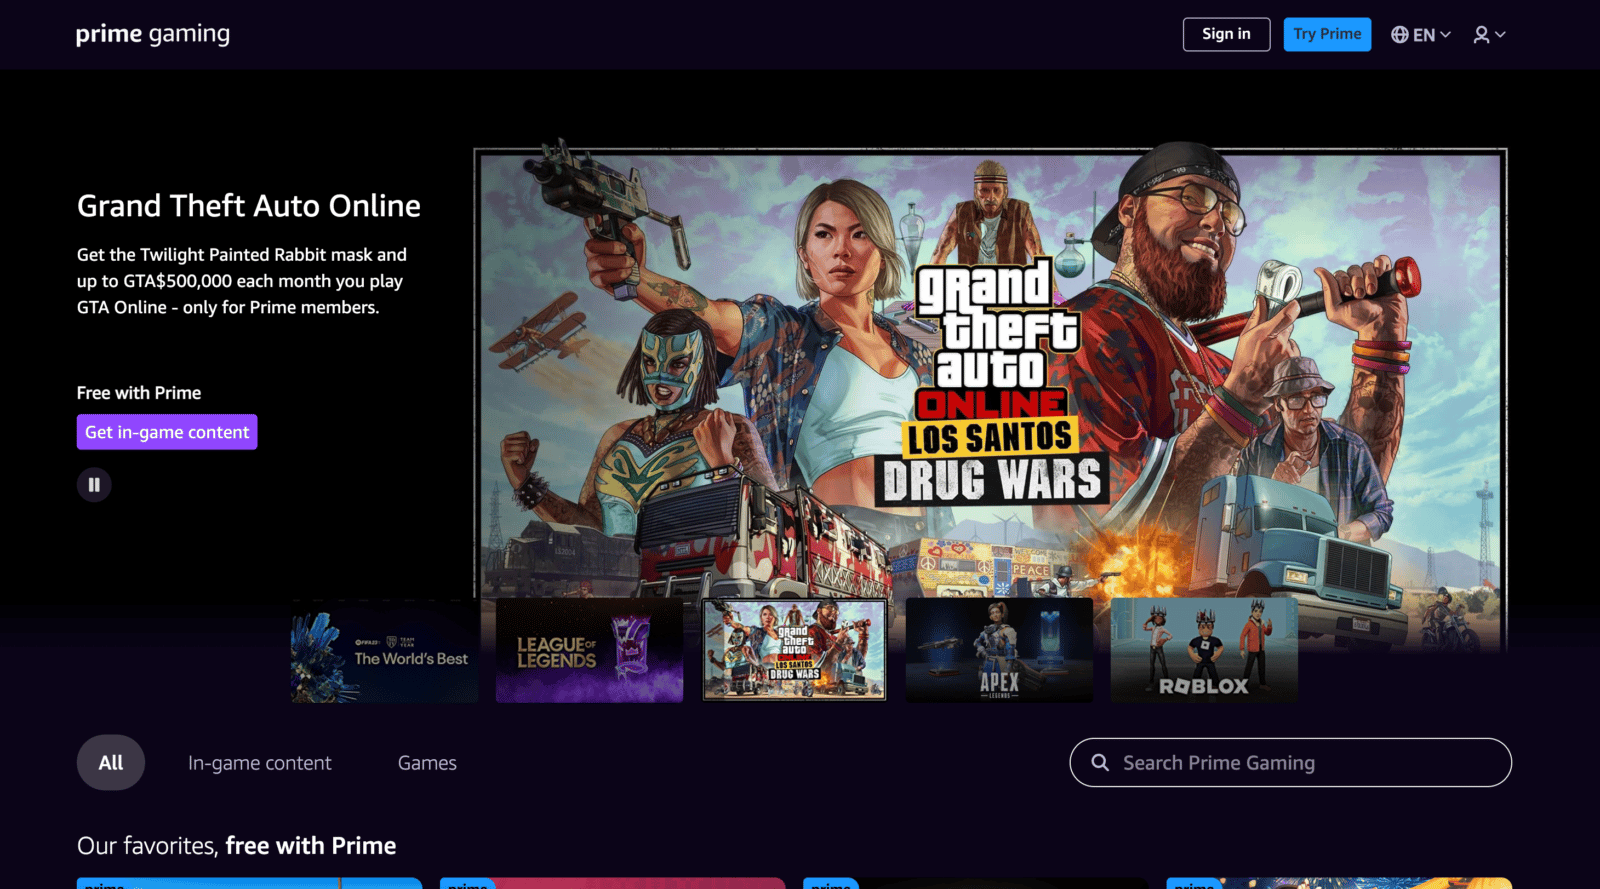 Twitch Prime is now Prime Gaming